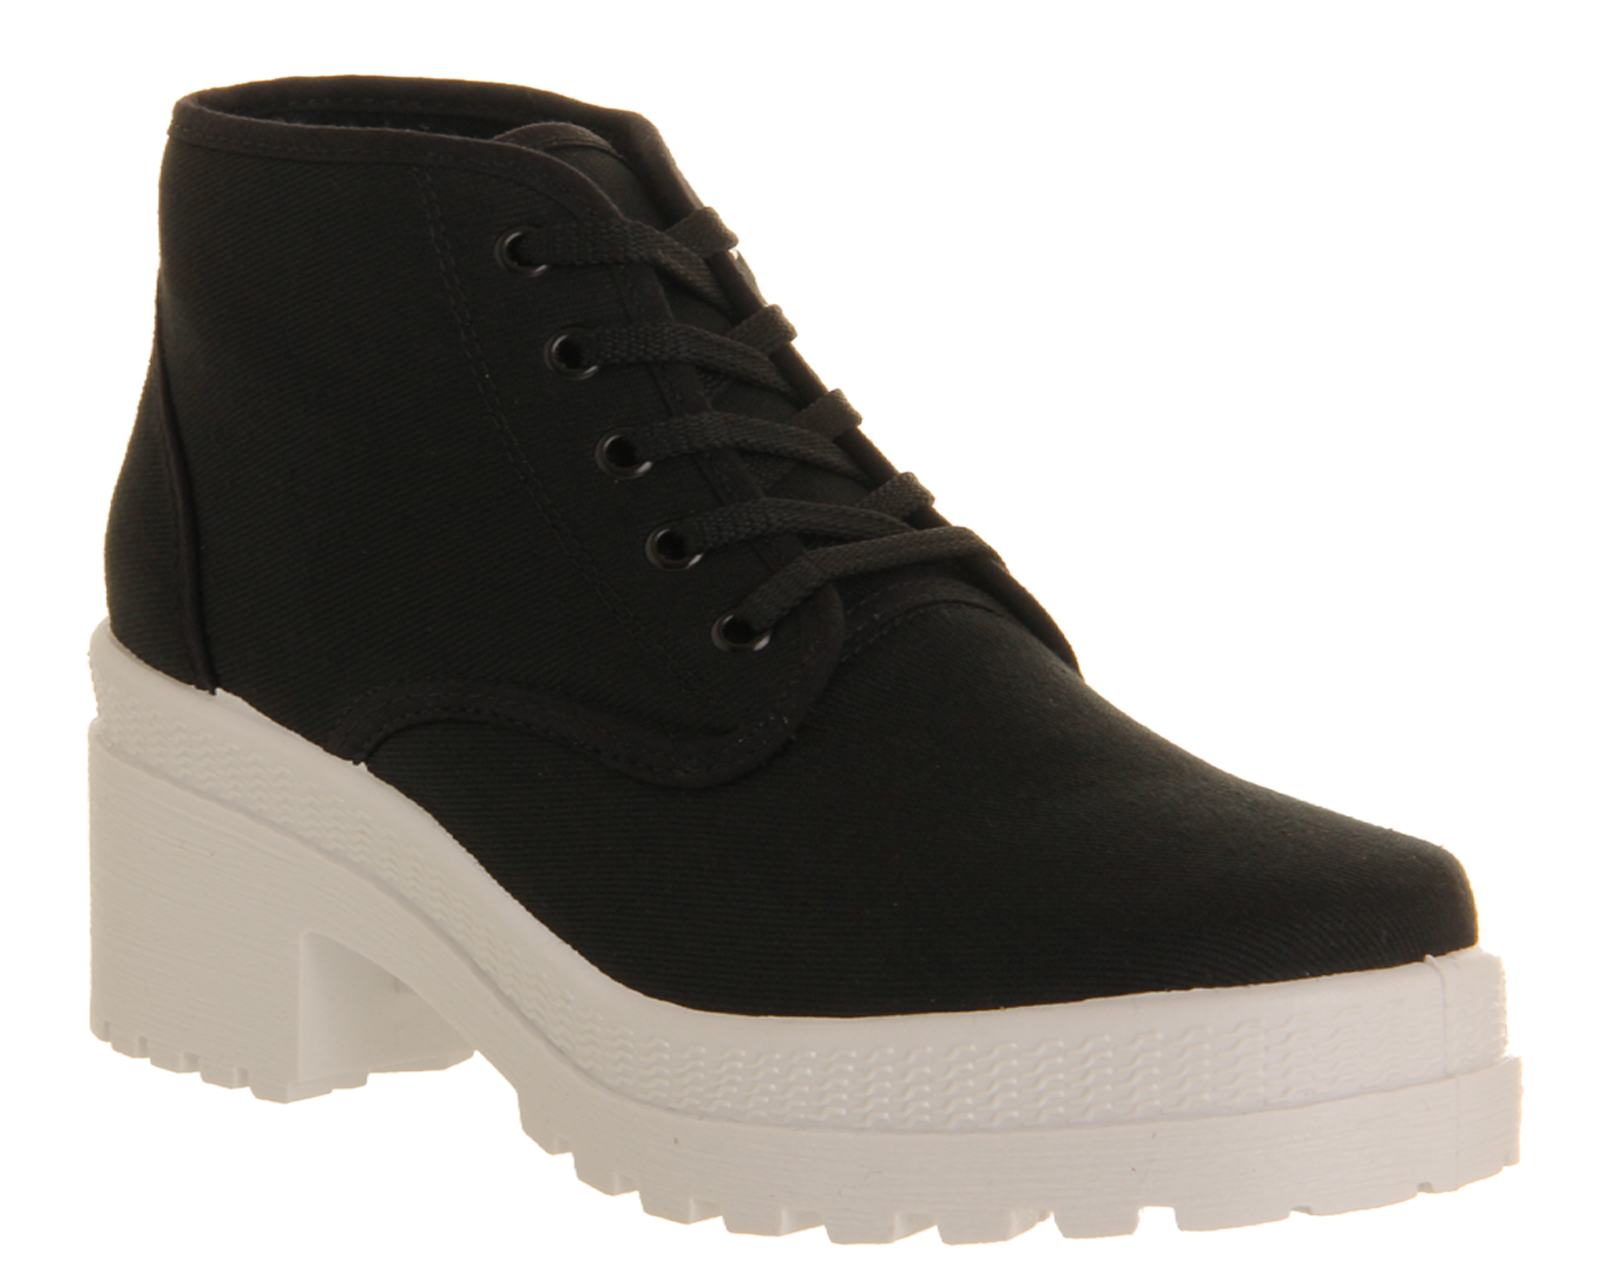 OFFICEChuck Canvas Chunky Lace UpBlack Canvas White Sole